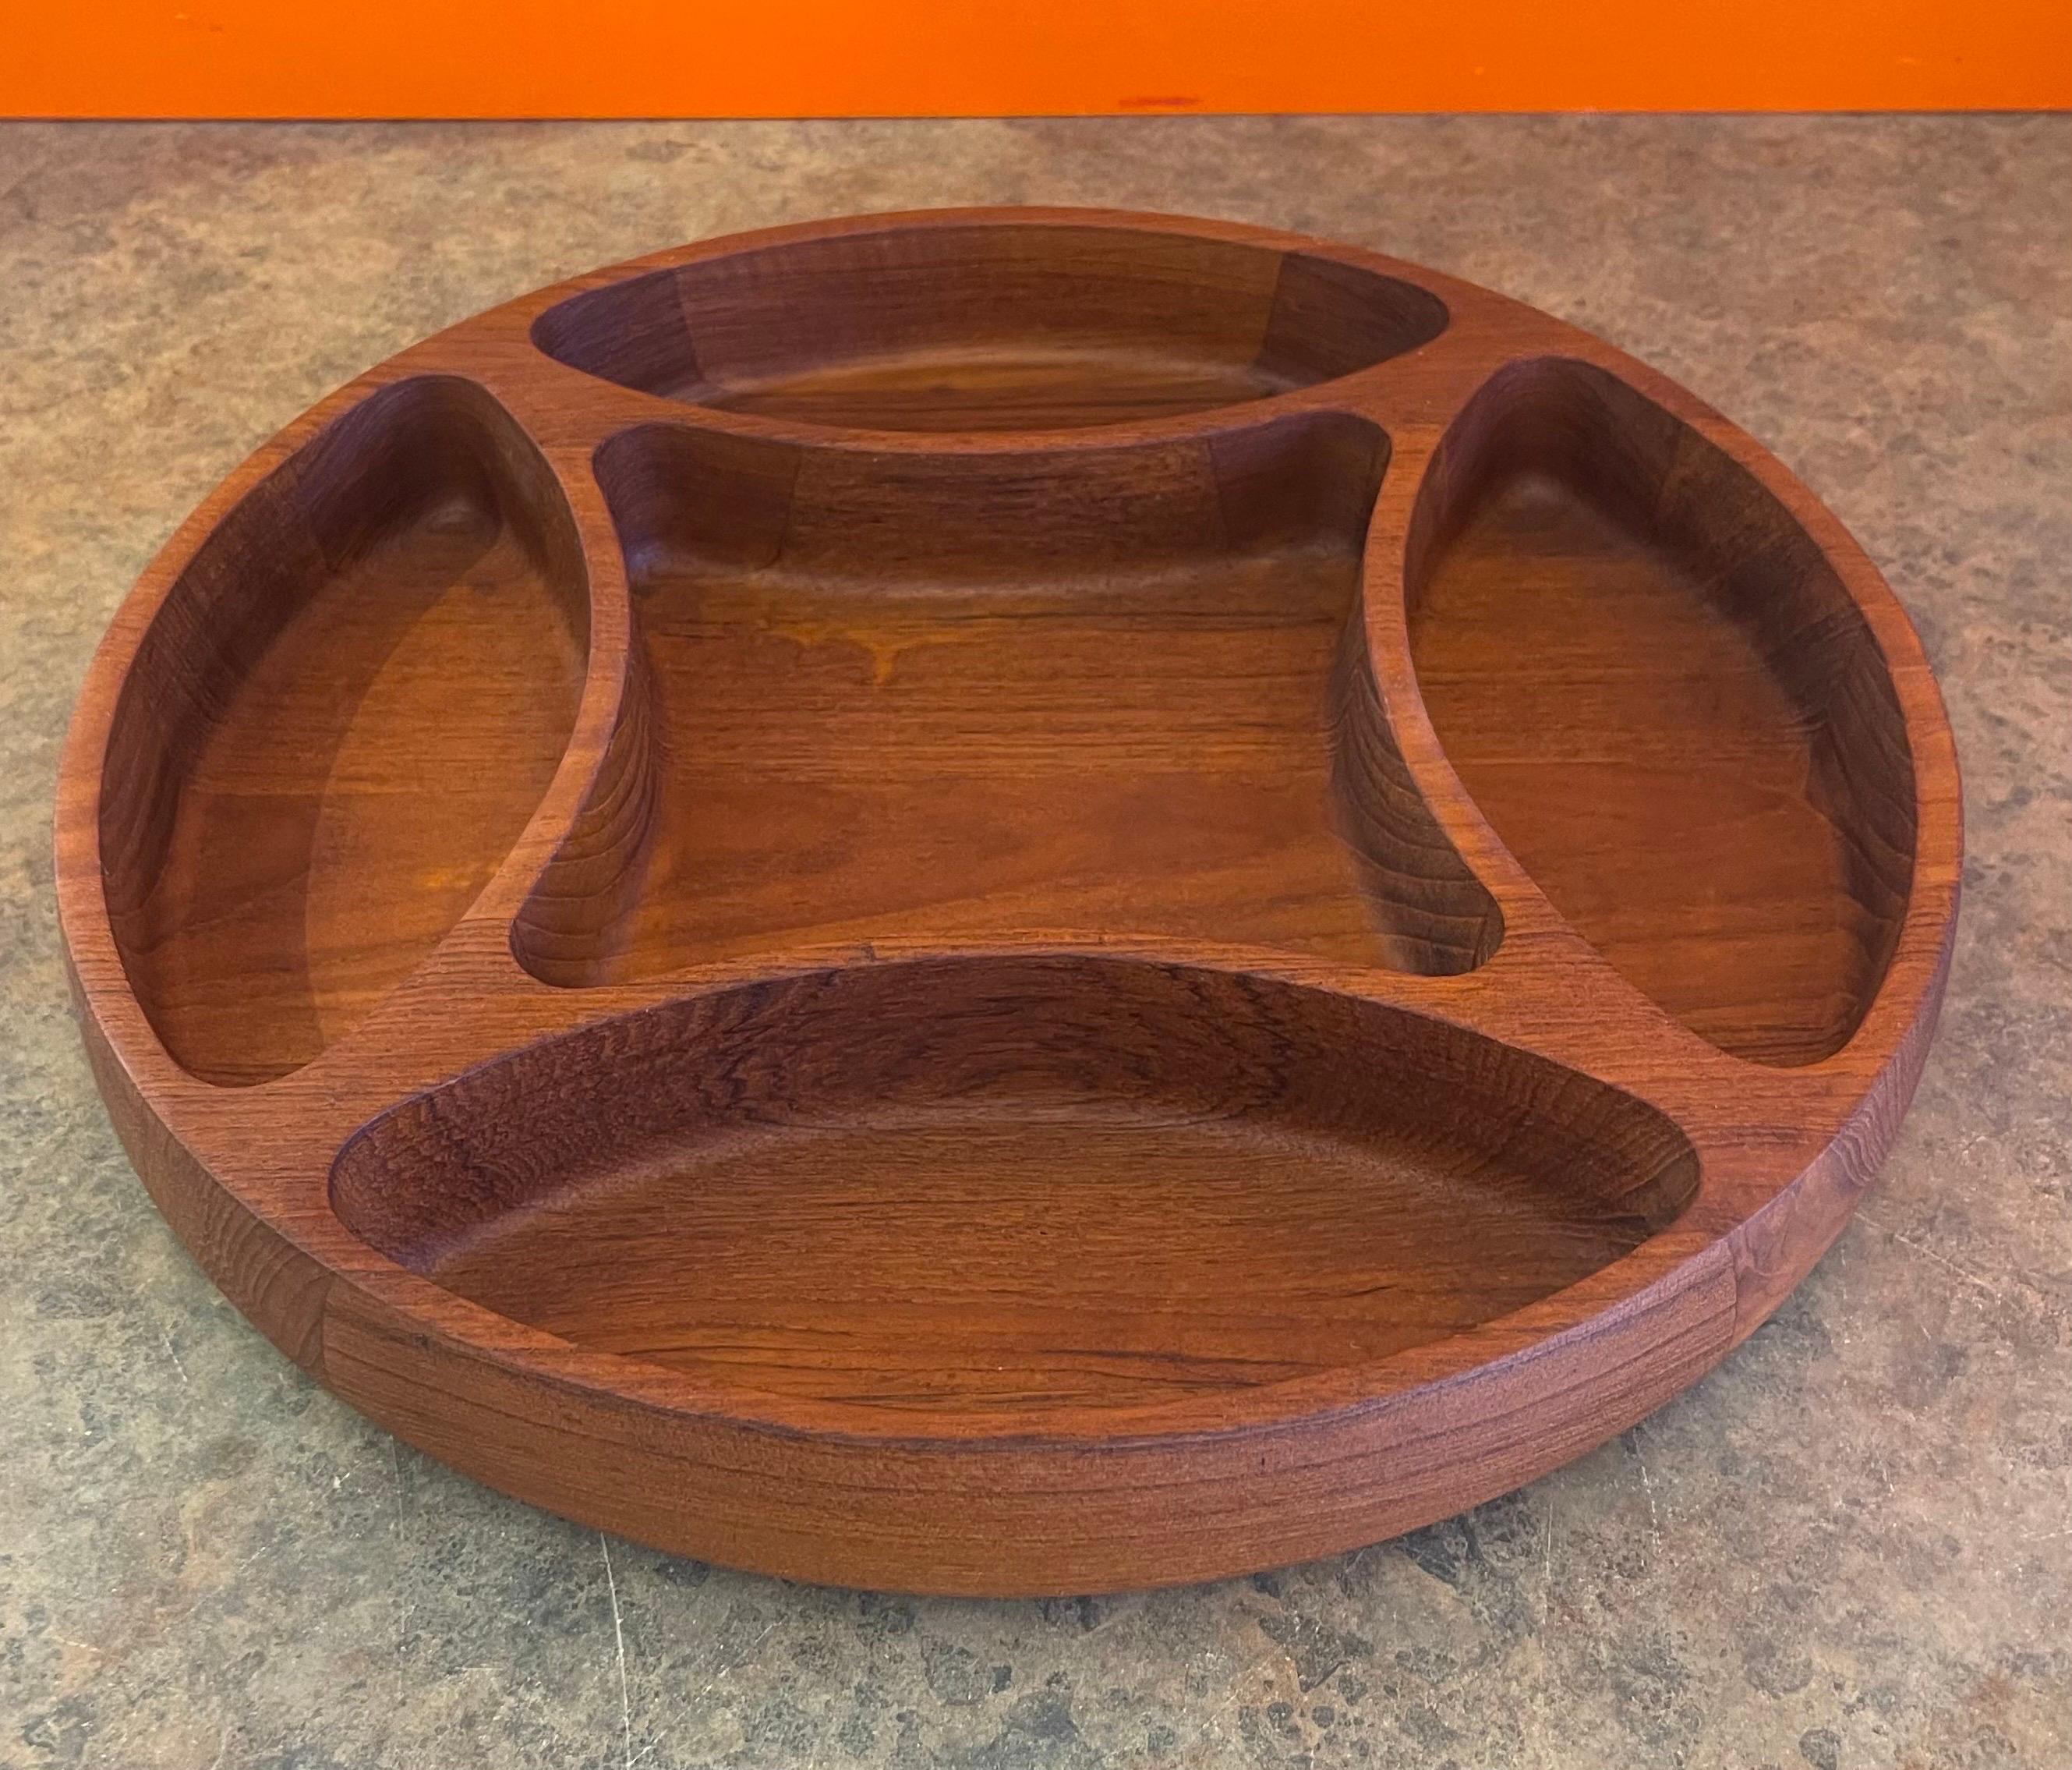 Large Divided Bowl / Tray in Teak by Jens Quistgaard for Dansk For Sale 1